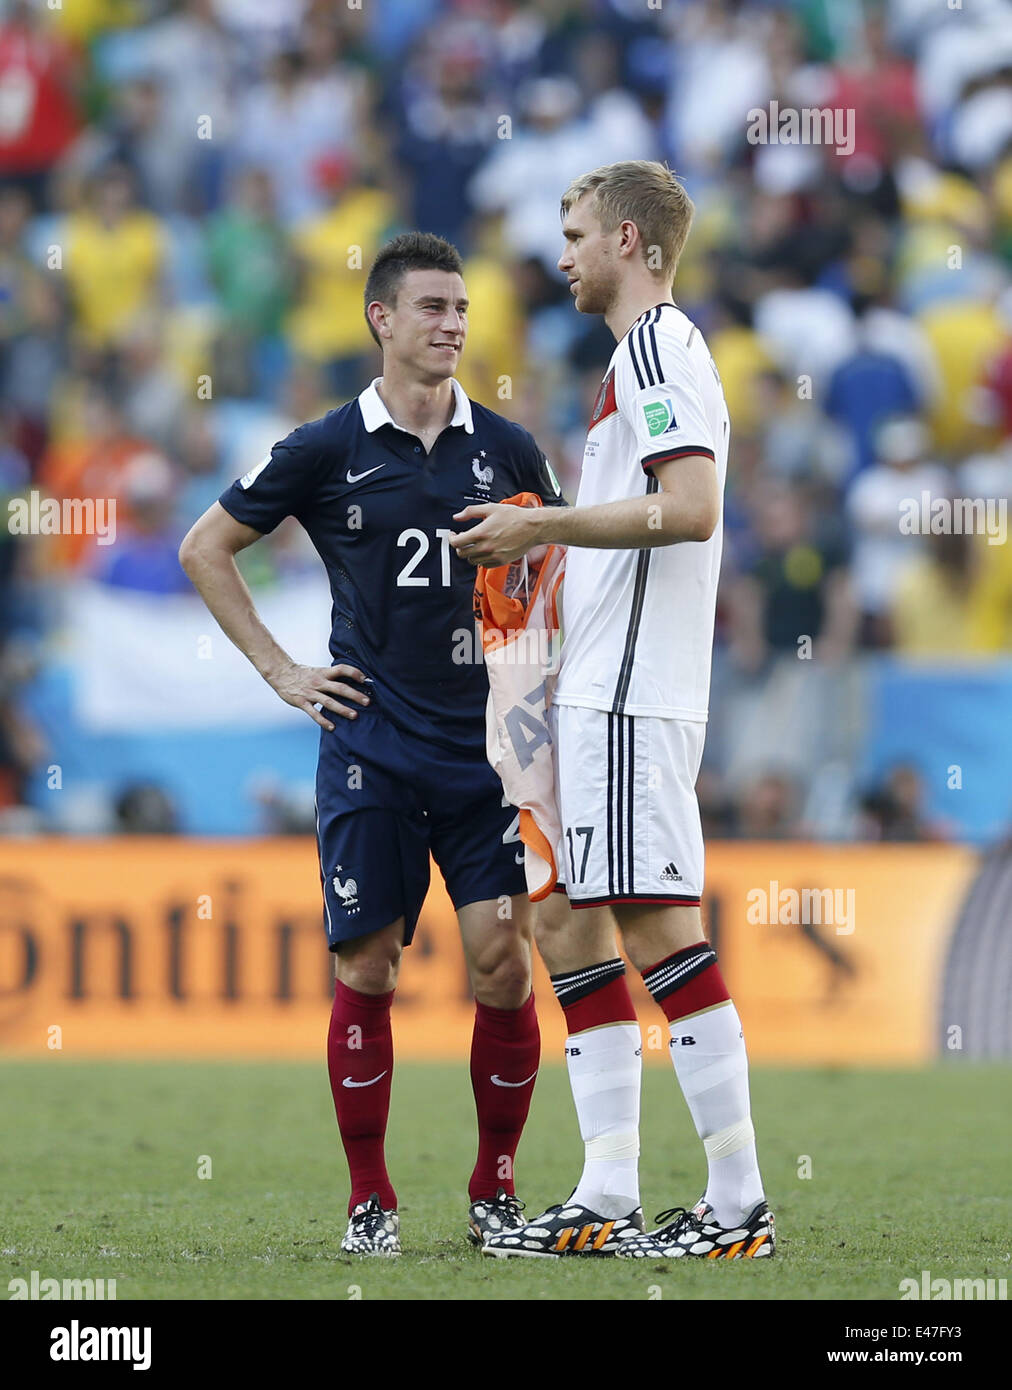 Rio De Janeiro, Brazil. 4th July, 2014. France's Laurent Koscielny speaks with Germany's Per Mertesacker after a quarter-finals match between France and Germany of 2014 FIFA World Cup at the Estadio do Maracana Stadium in Rio de Janeiro, Brazil, on July 4, 2014. Germany won 1-0 over France and qualified for semi-finals on Friday. Credit:  Wang Lili/Xinhua/Alamy Live News Stock Photo